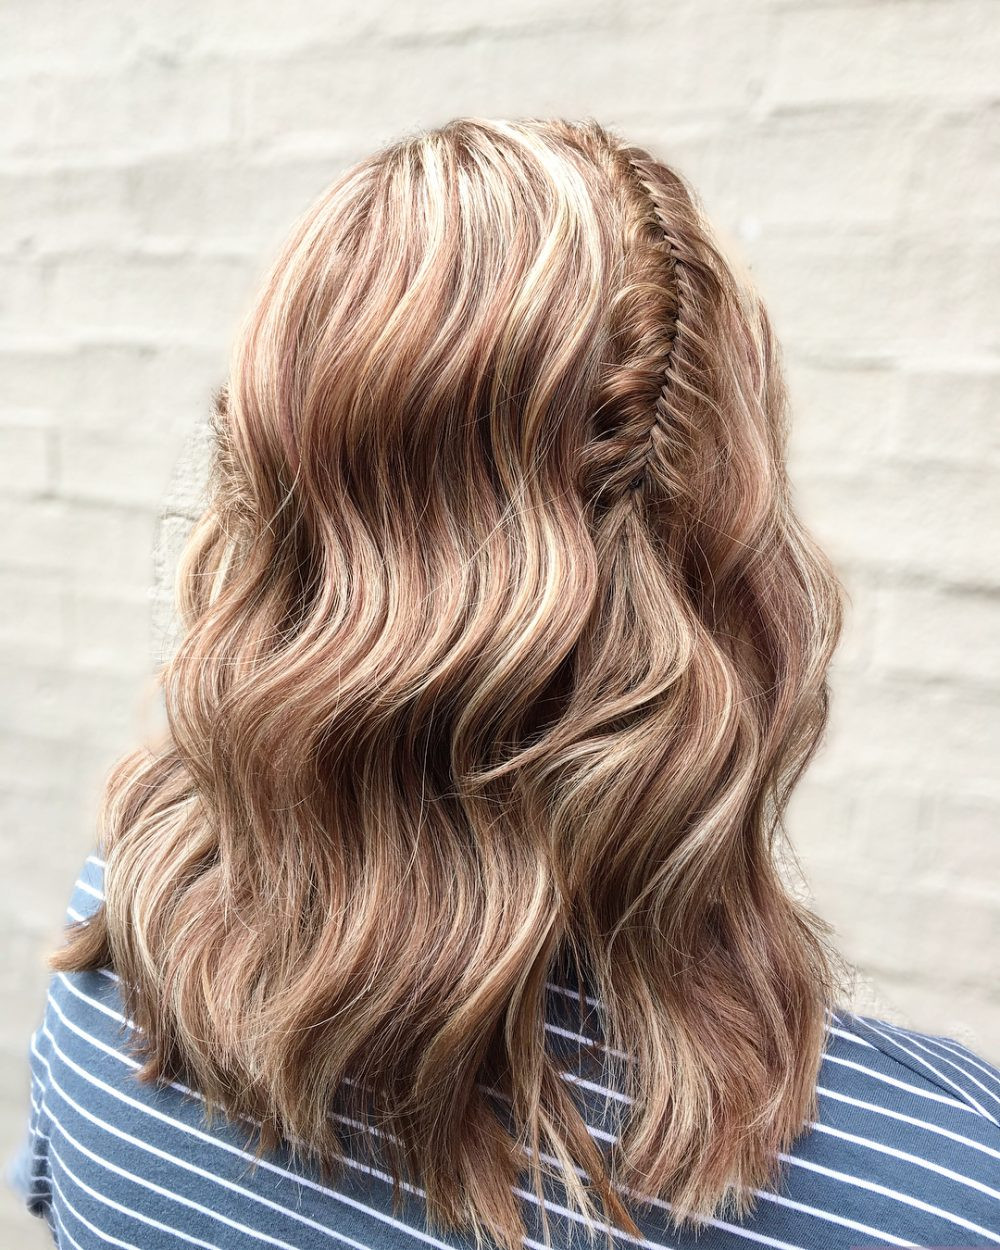 Hairstyle For Prom Medium Hair
 32 Cutest Prom Hairstyles for Medium Length Hair for 2019